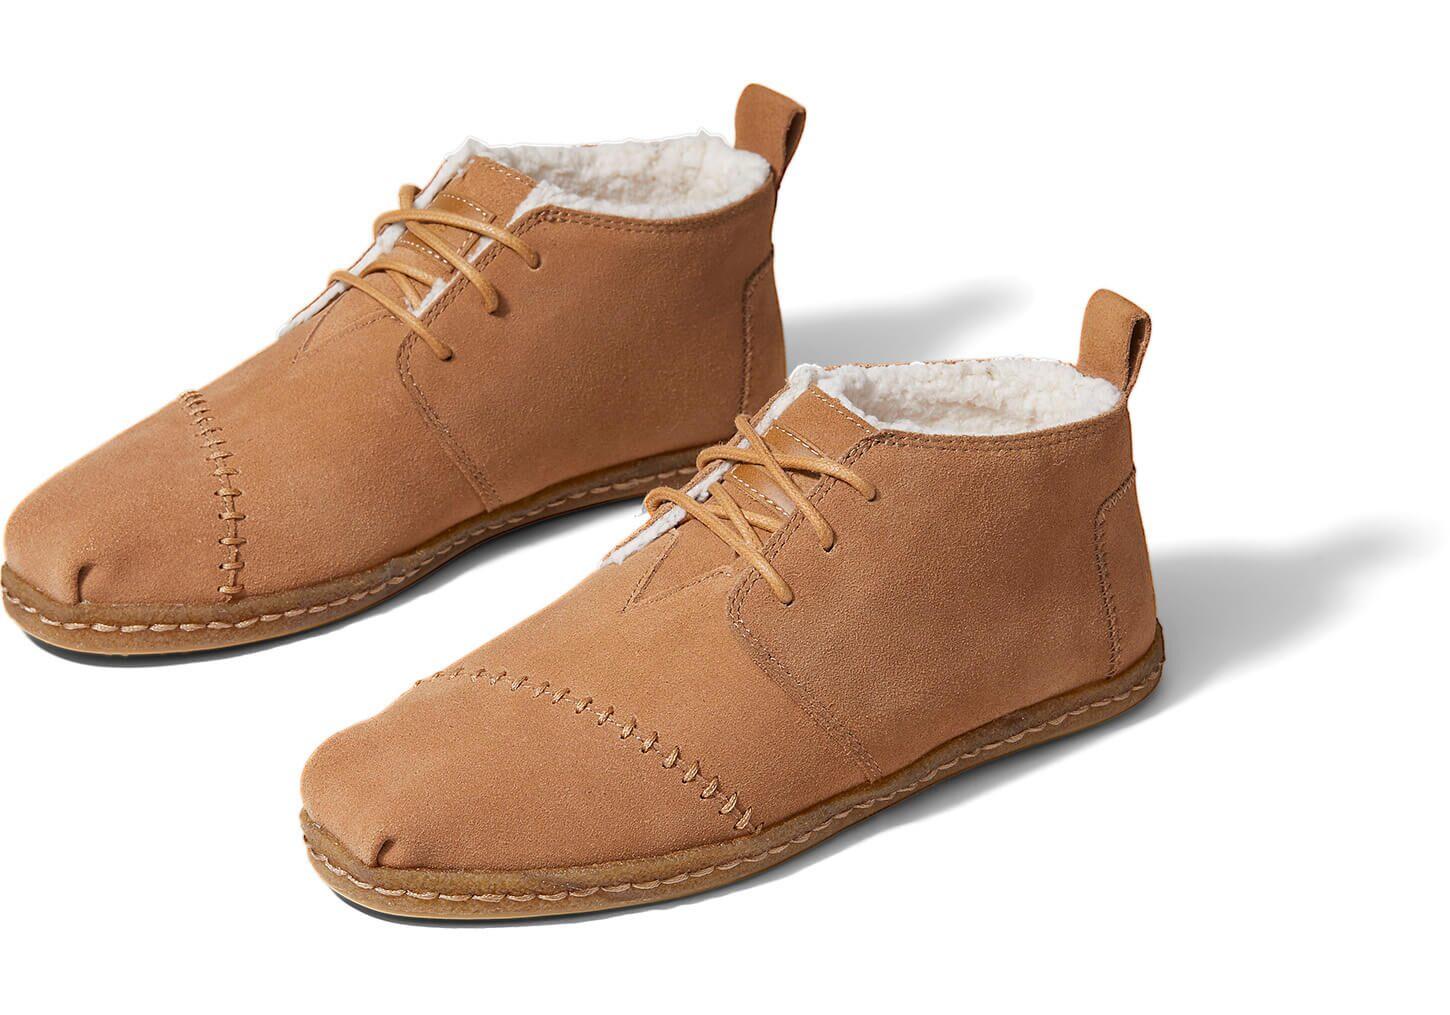 toffee suede crepe women's classics